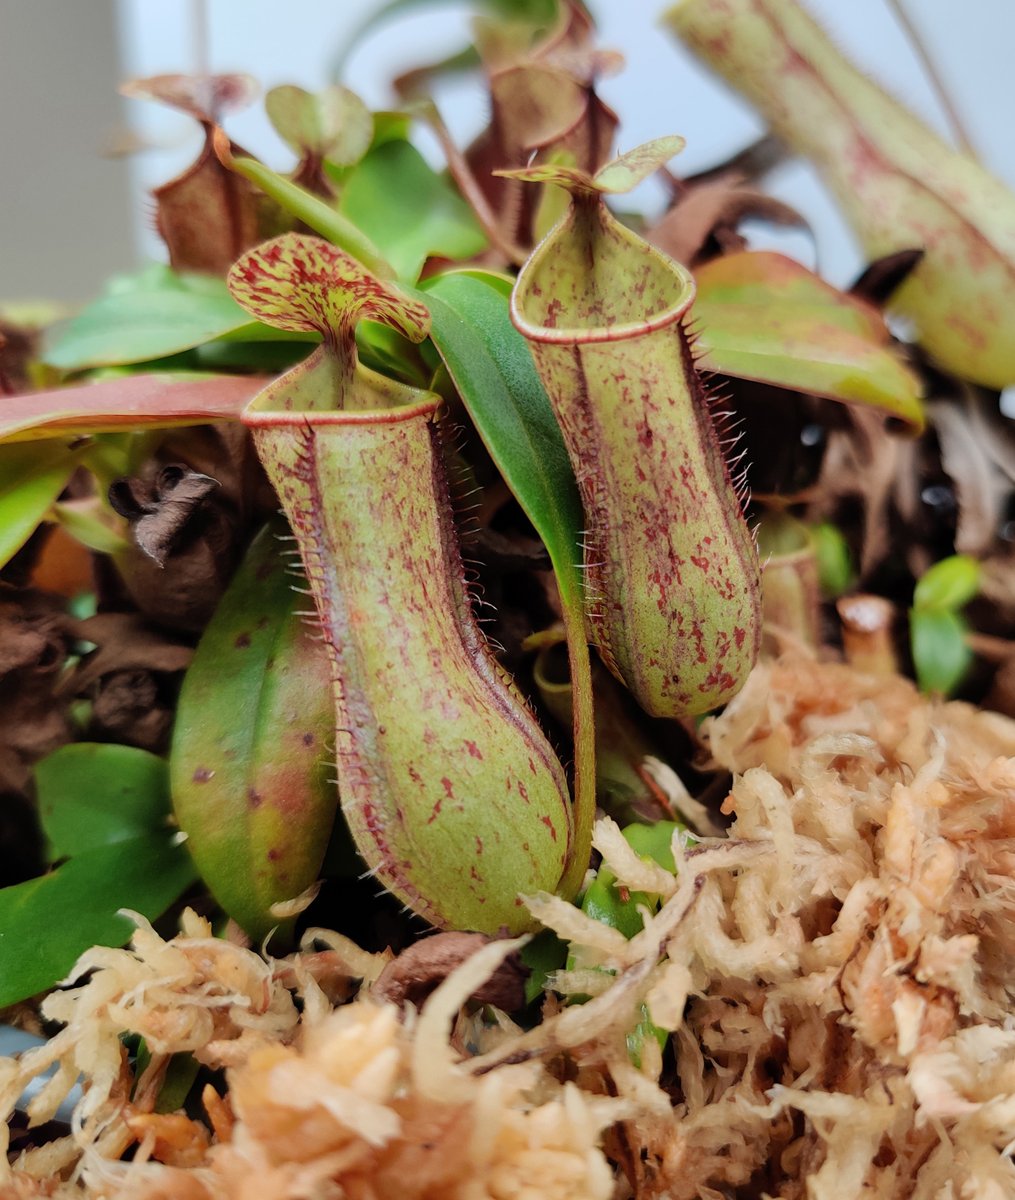 Botanist @kfuku0502 and his team have investigated the role of subgenome dominance in a pitcher plant’s evolutionary development of carnivorism and dioecy.🧬🌱The results have potential applications in agriculture. Study published in @NaturePlants. ➡️uni-wuerzburg.de/en/news-and-ev…